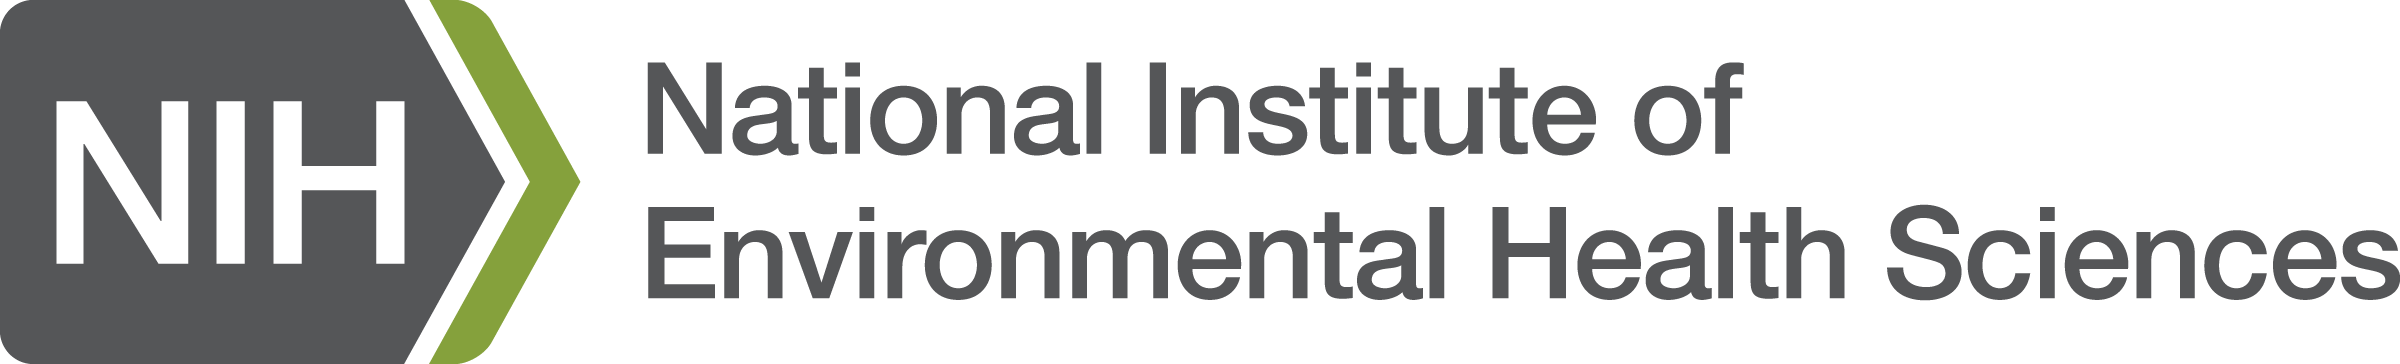 national institute of environmental health sciences